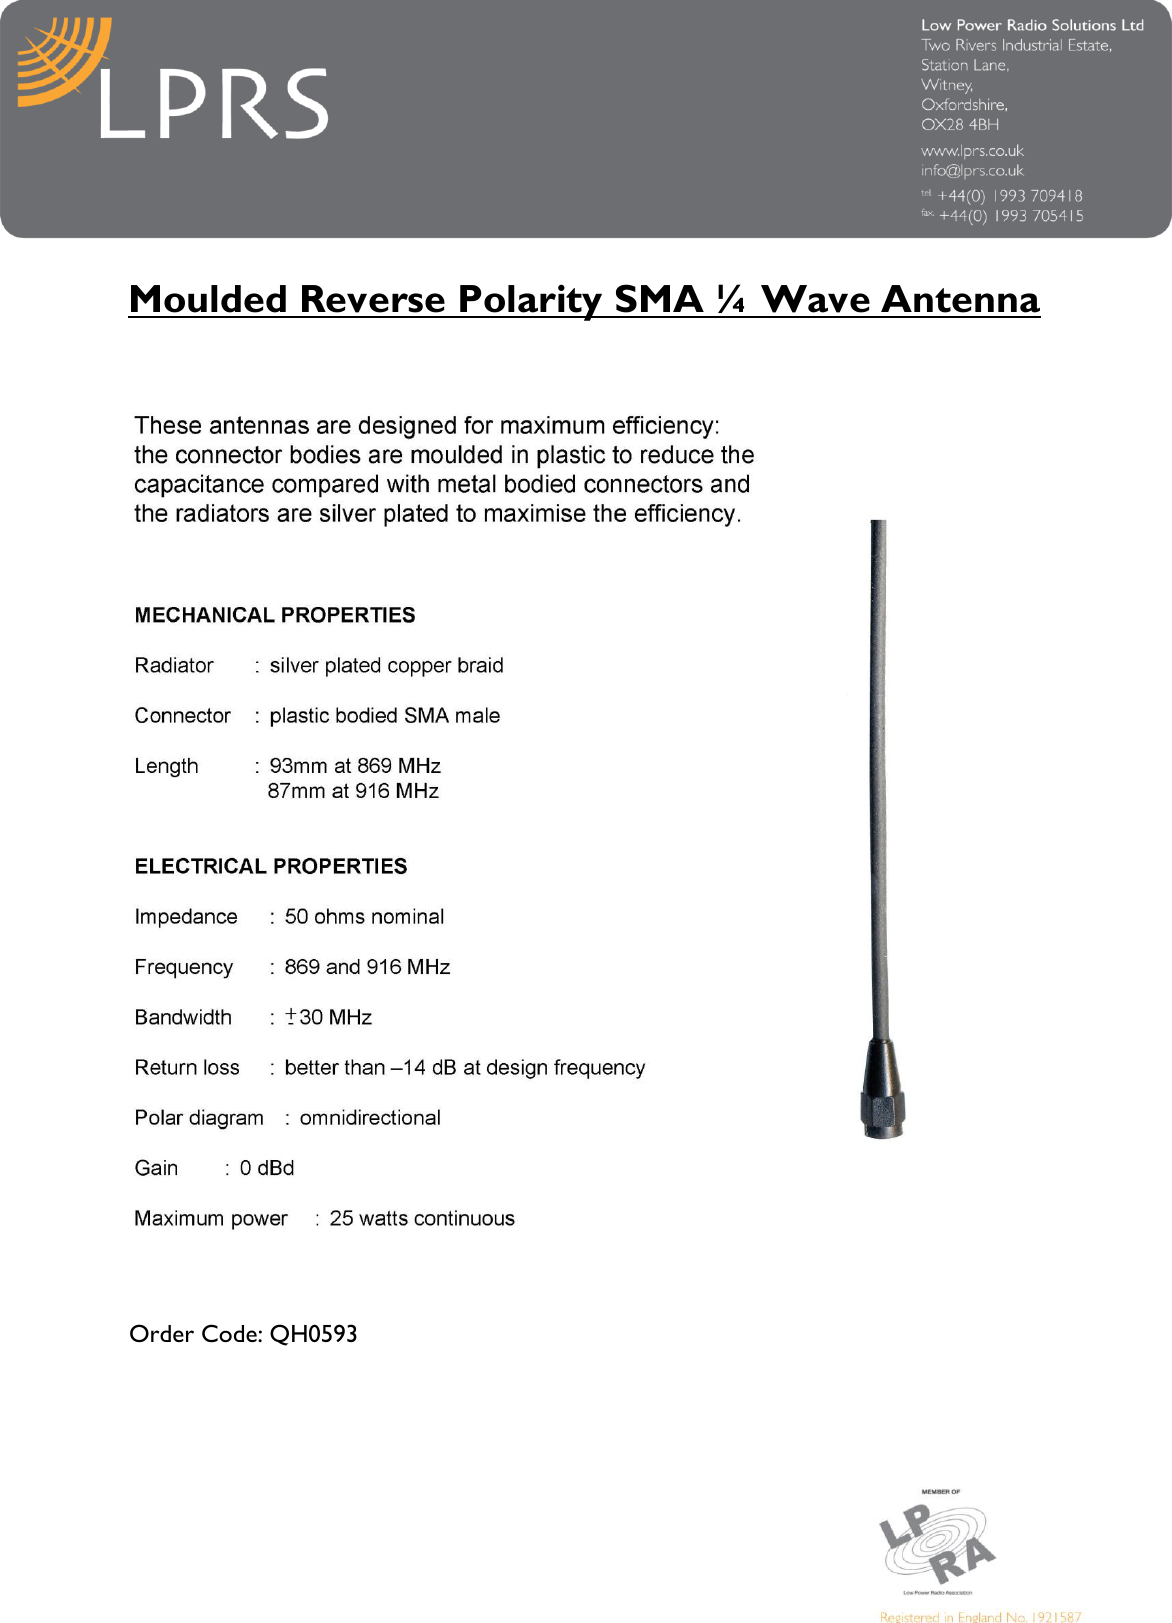   Moulded Reverse Polarity SMA ¼ Wave Antenna      Order Code: QH0593 